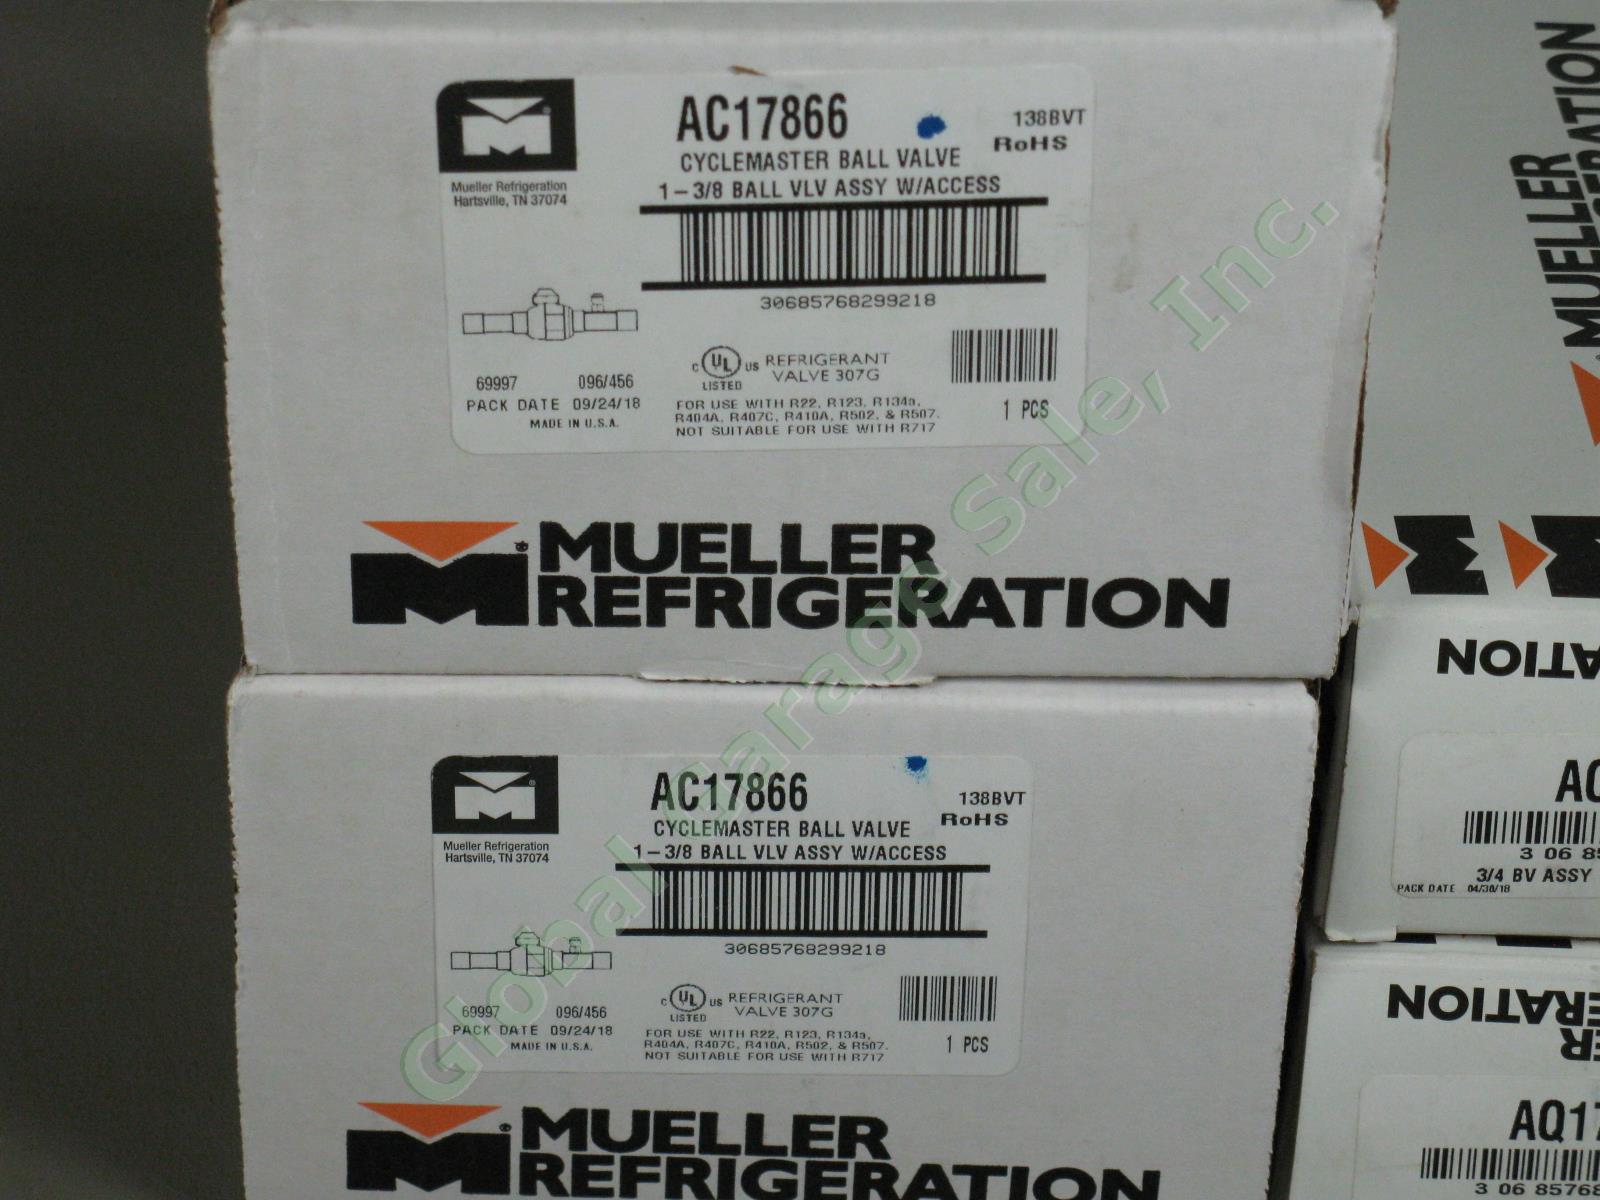 7 Mueller Refrigeration Cyclemaster Ball Valve LOT Collection with Access NIB NR 1